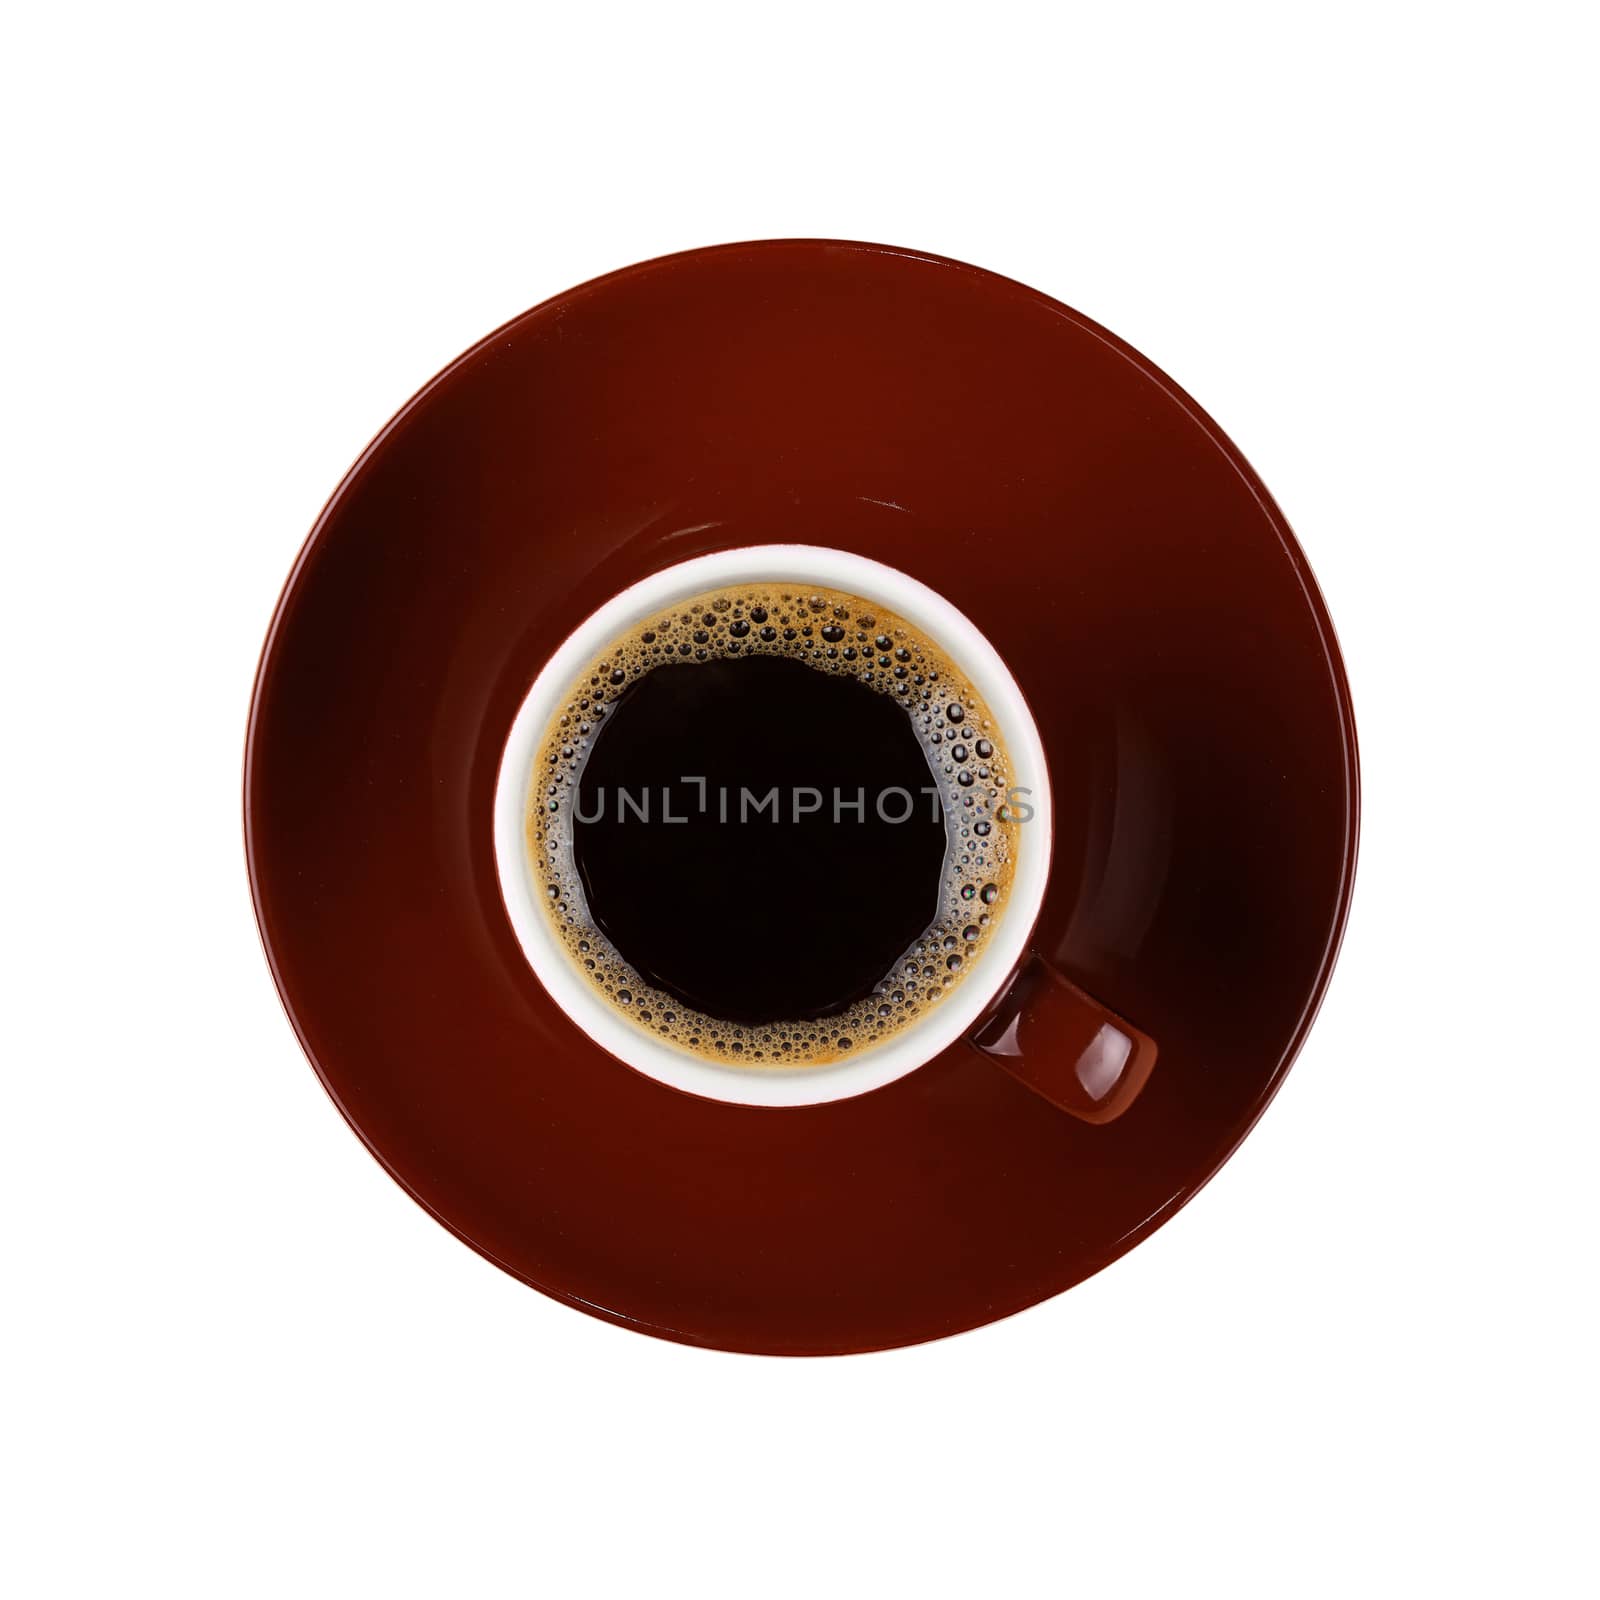 Full small brown ceramic espresso cup of black coffee with saucer isolated on white background, close up, elevated top view, directly above